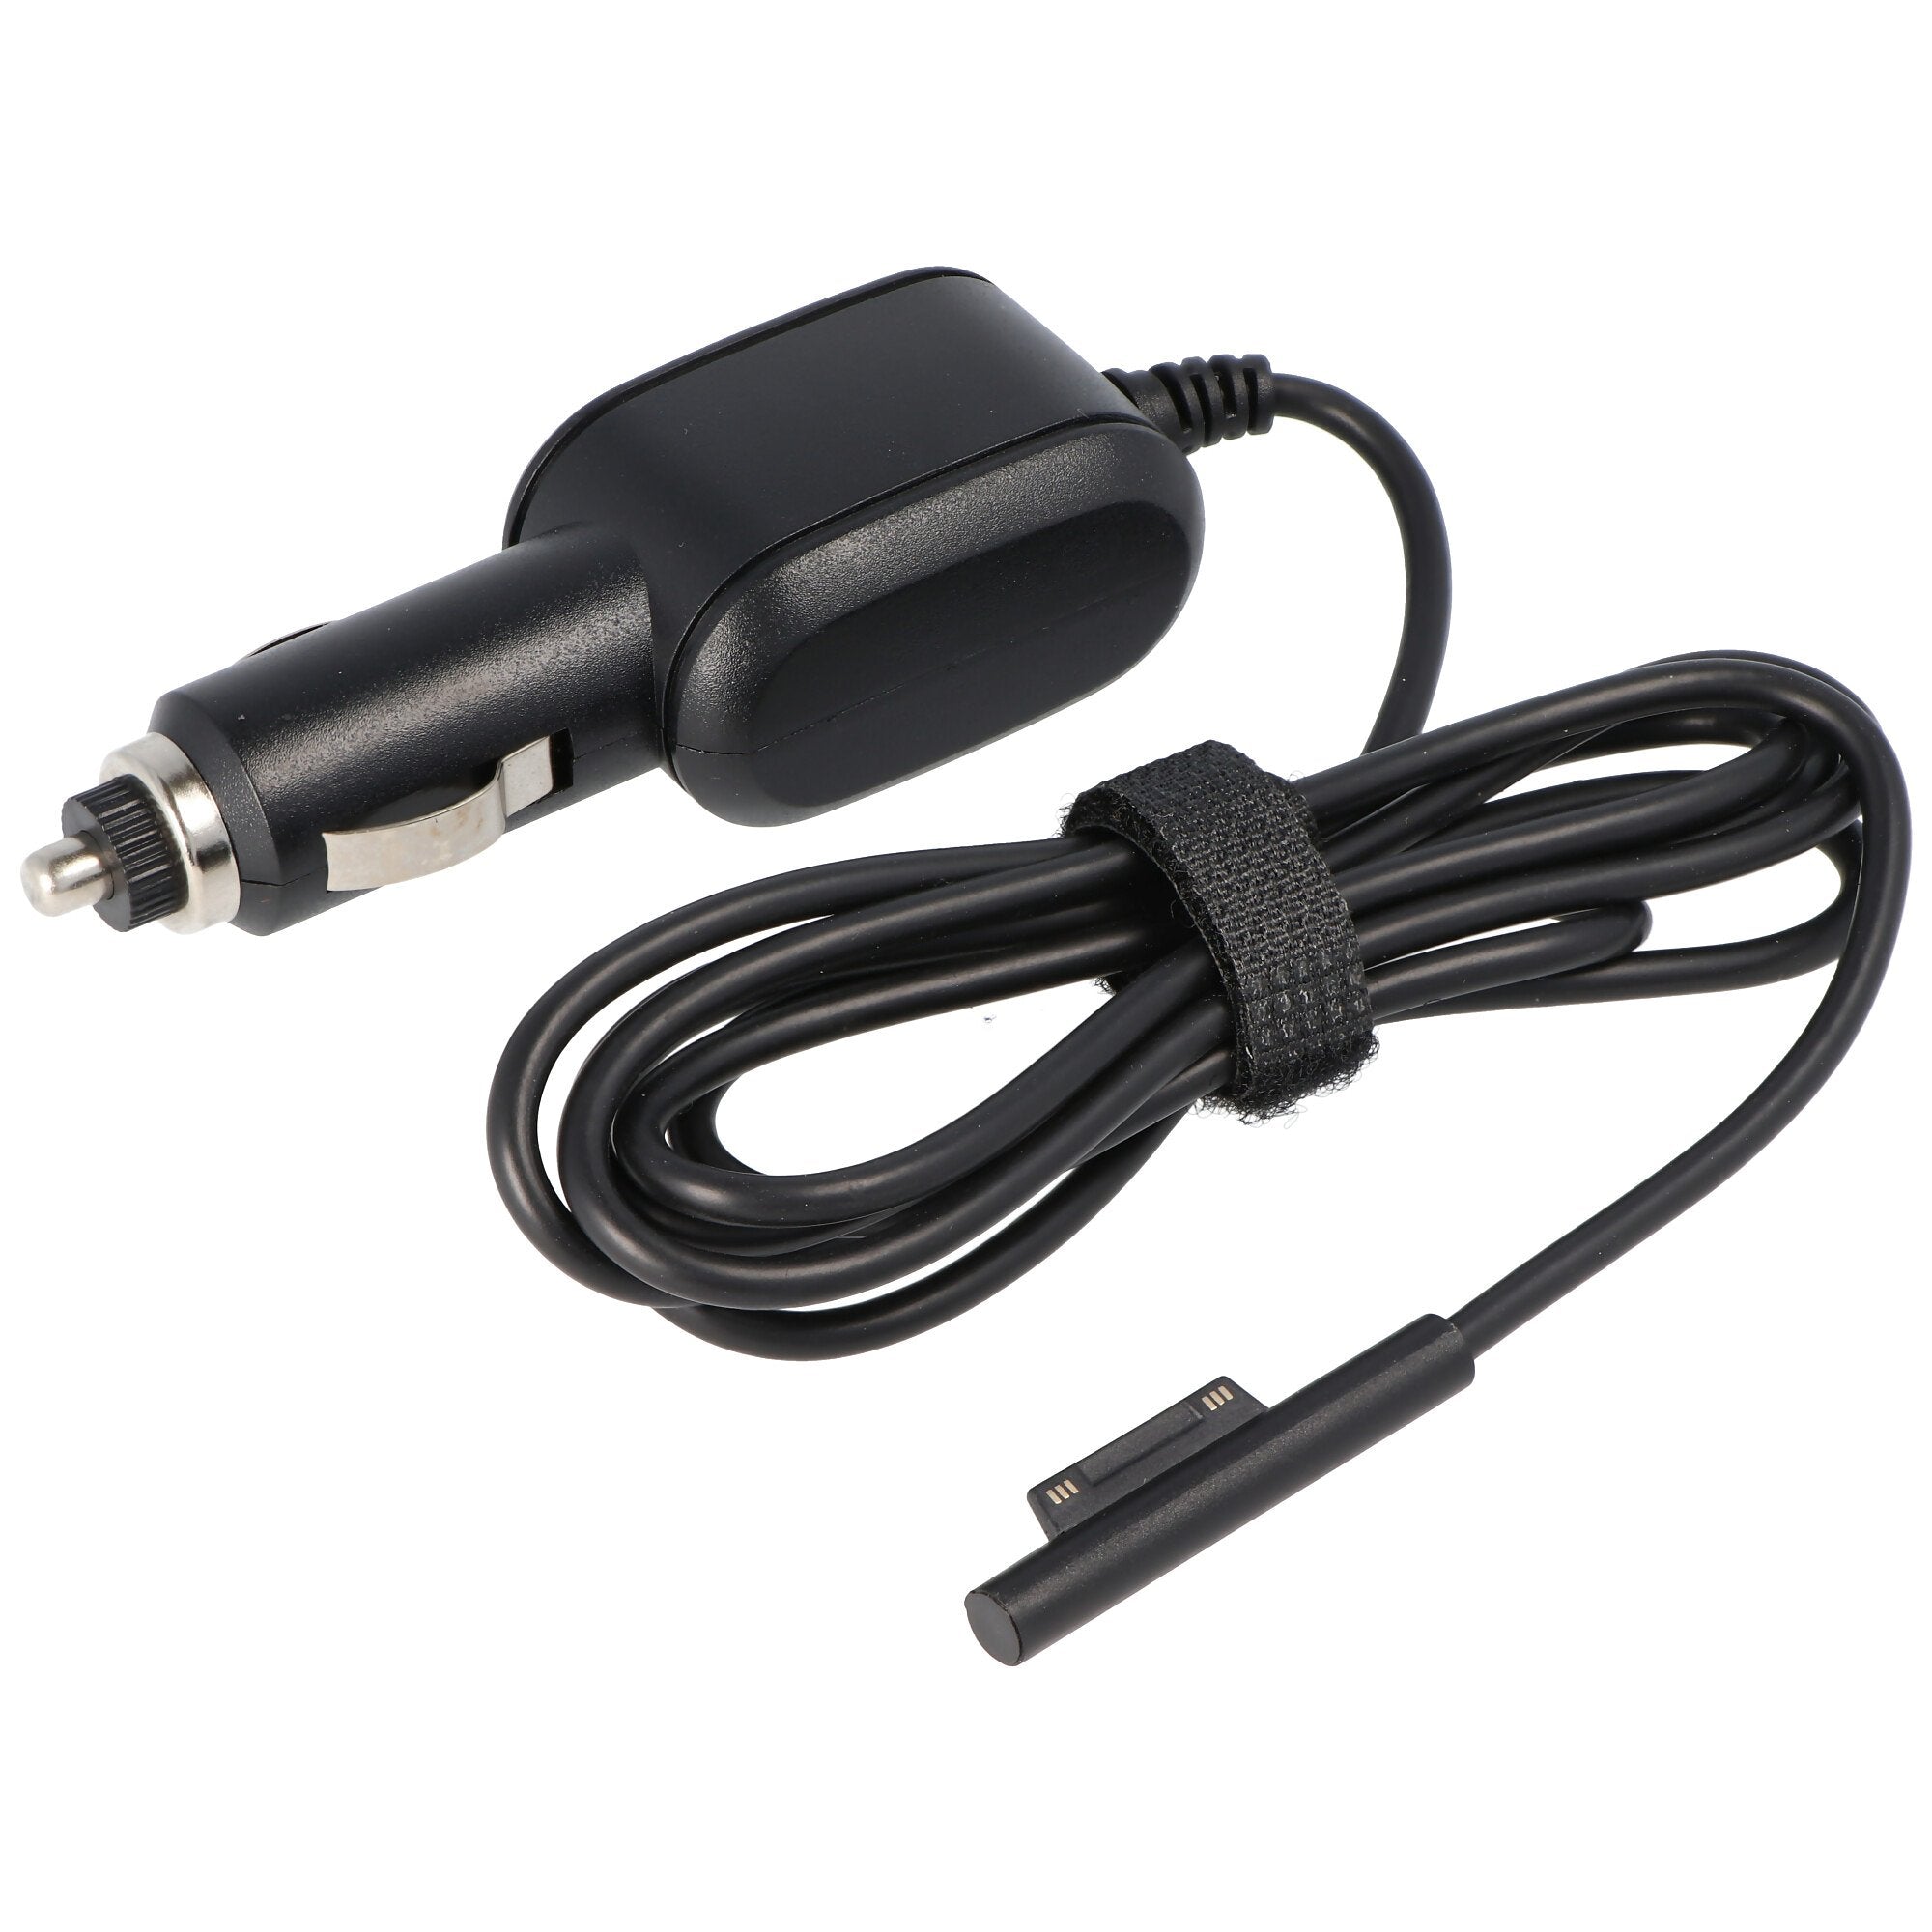 12V car power supply for the Microsoft Surface Pro 3, Surface Pro3 from AccuCell